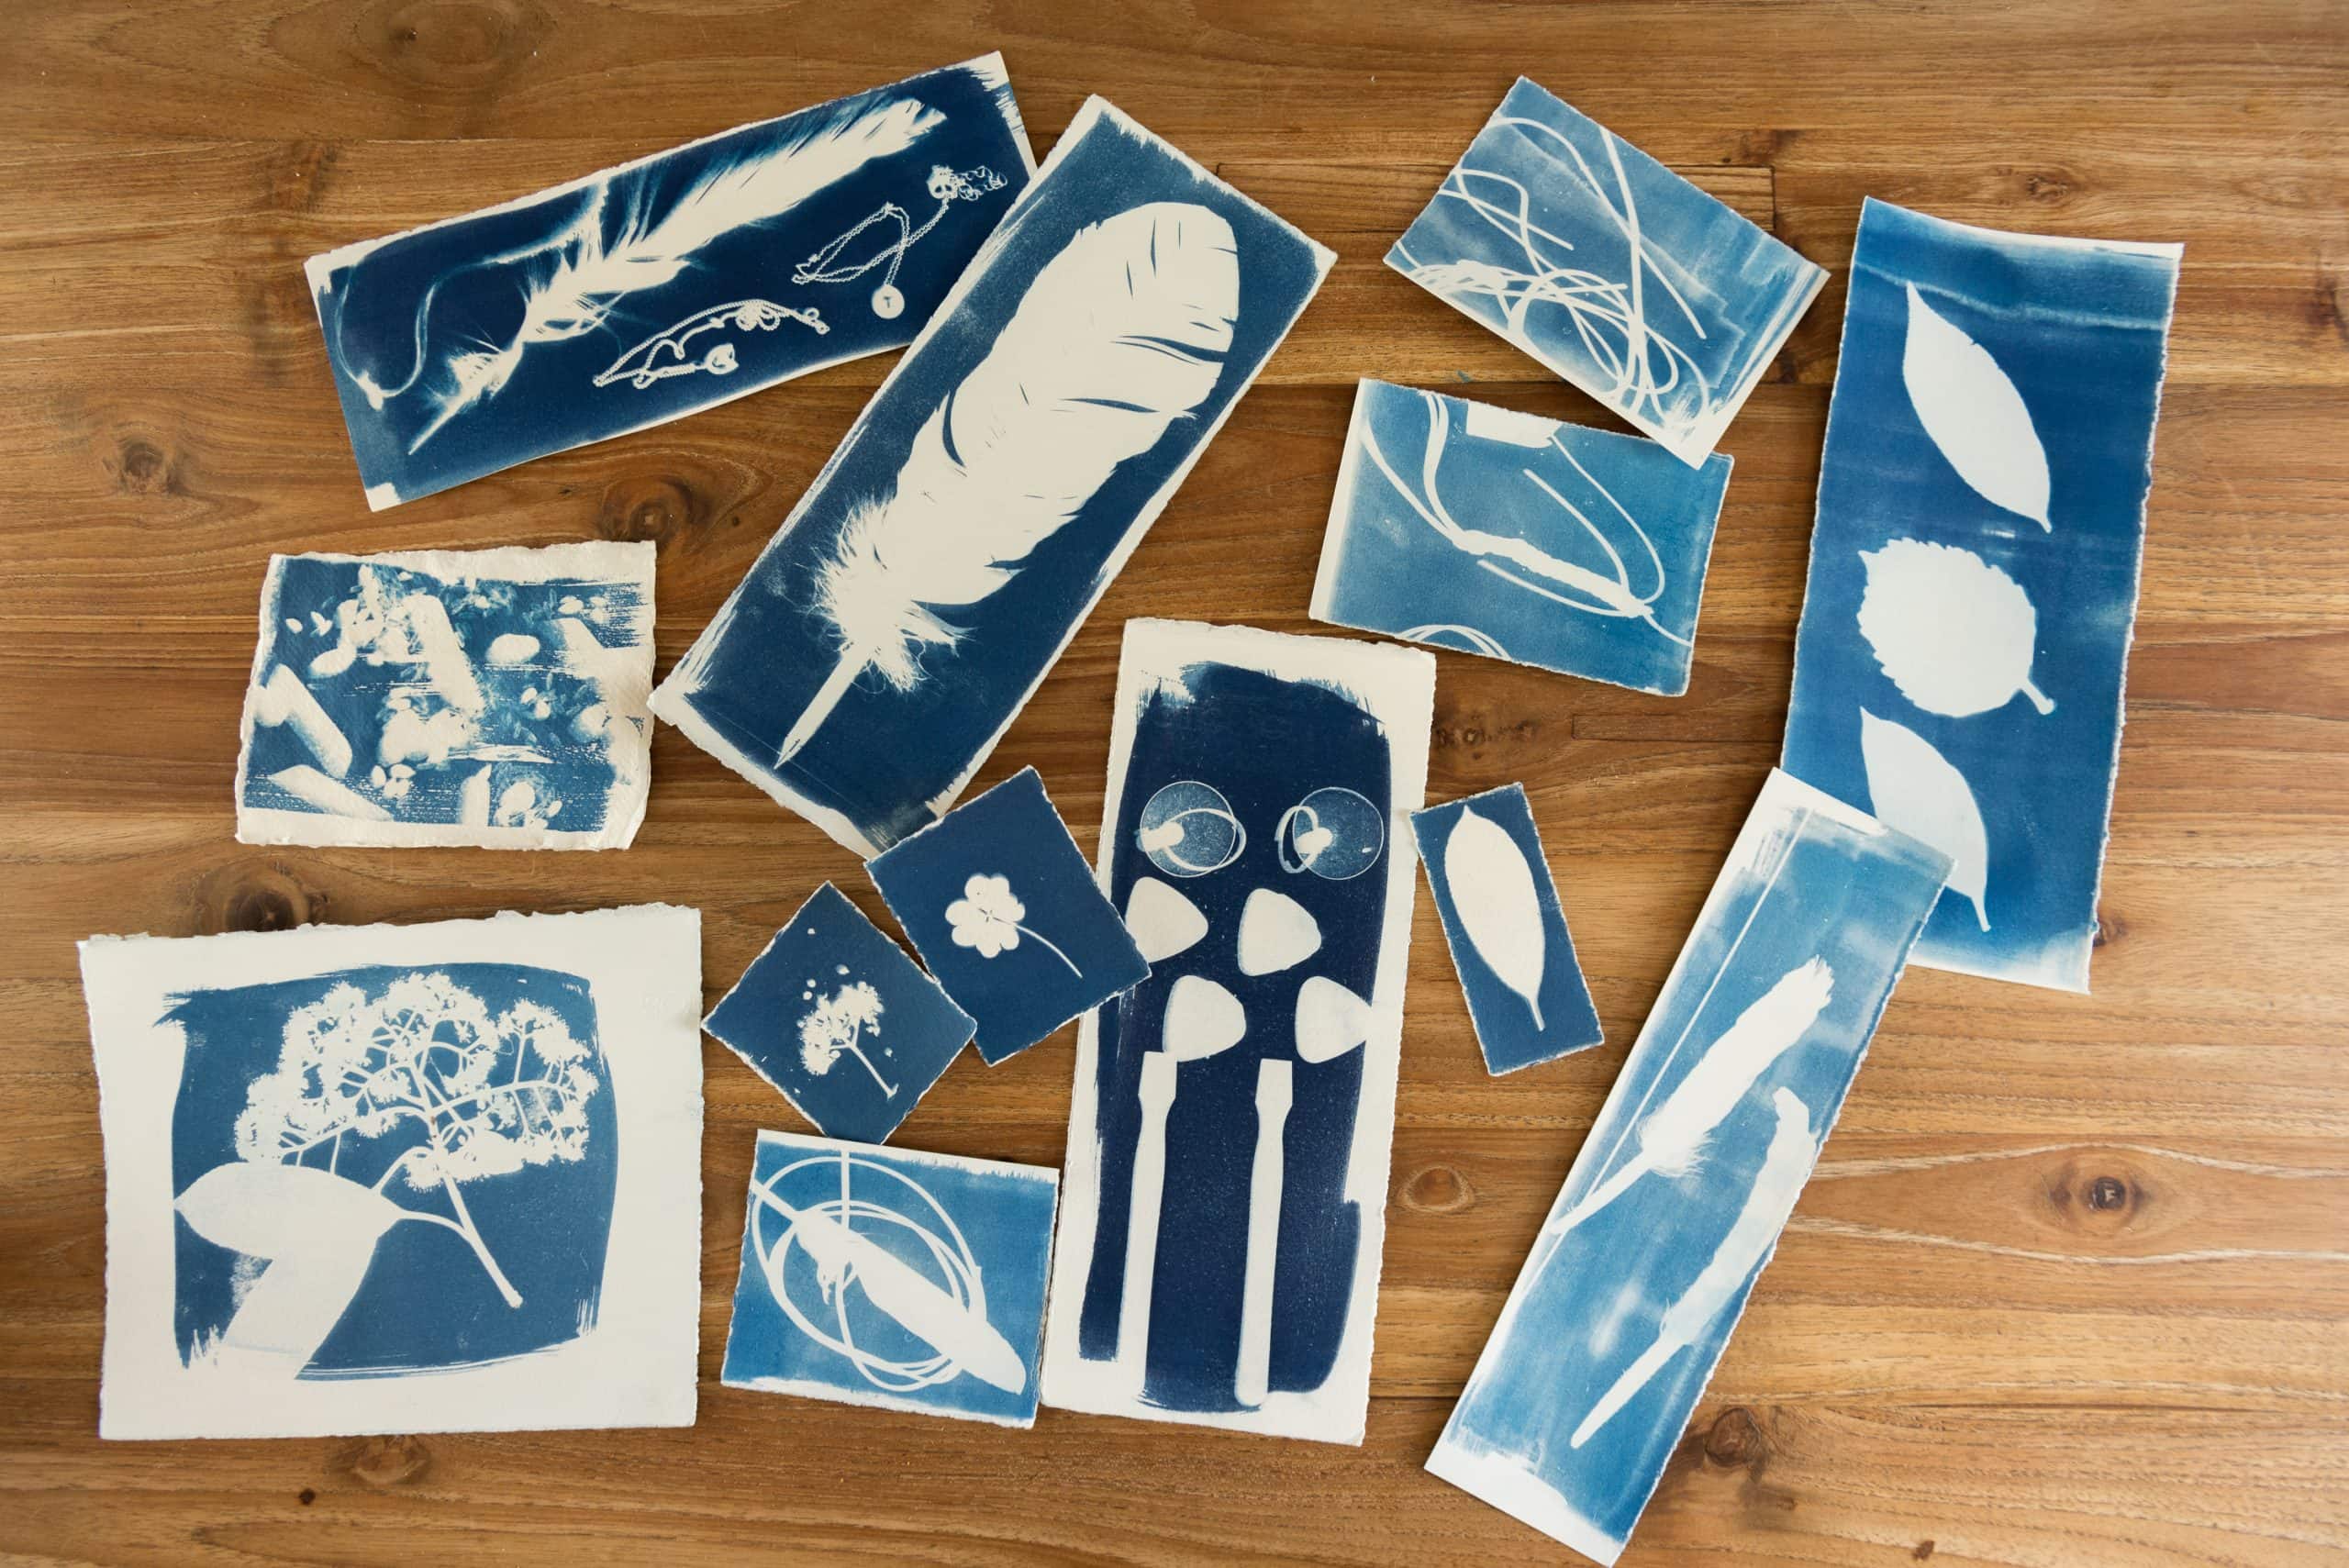 5 more awesome things you can do with Cyanotype photography